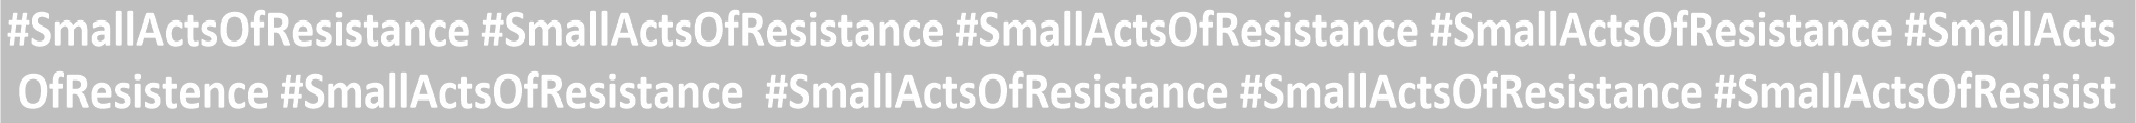 small acts of resistance